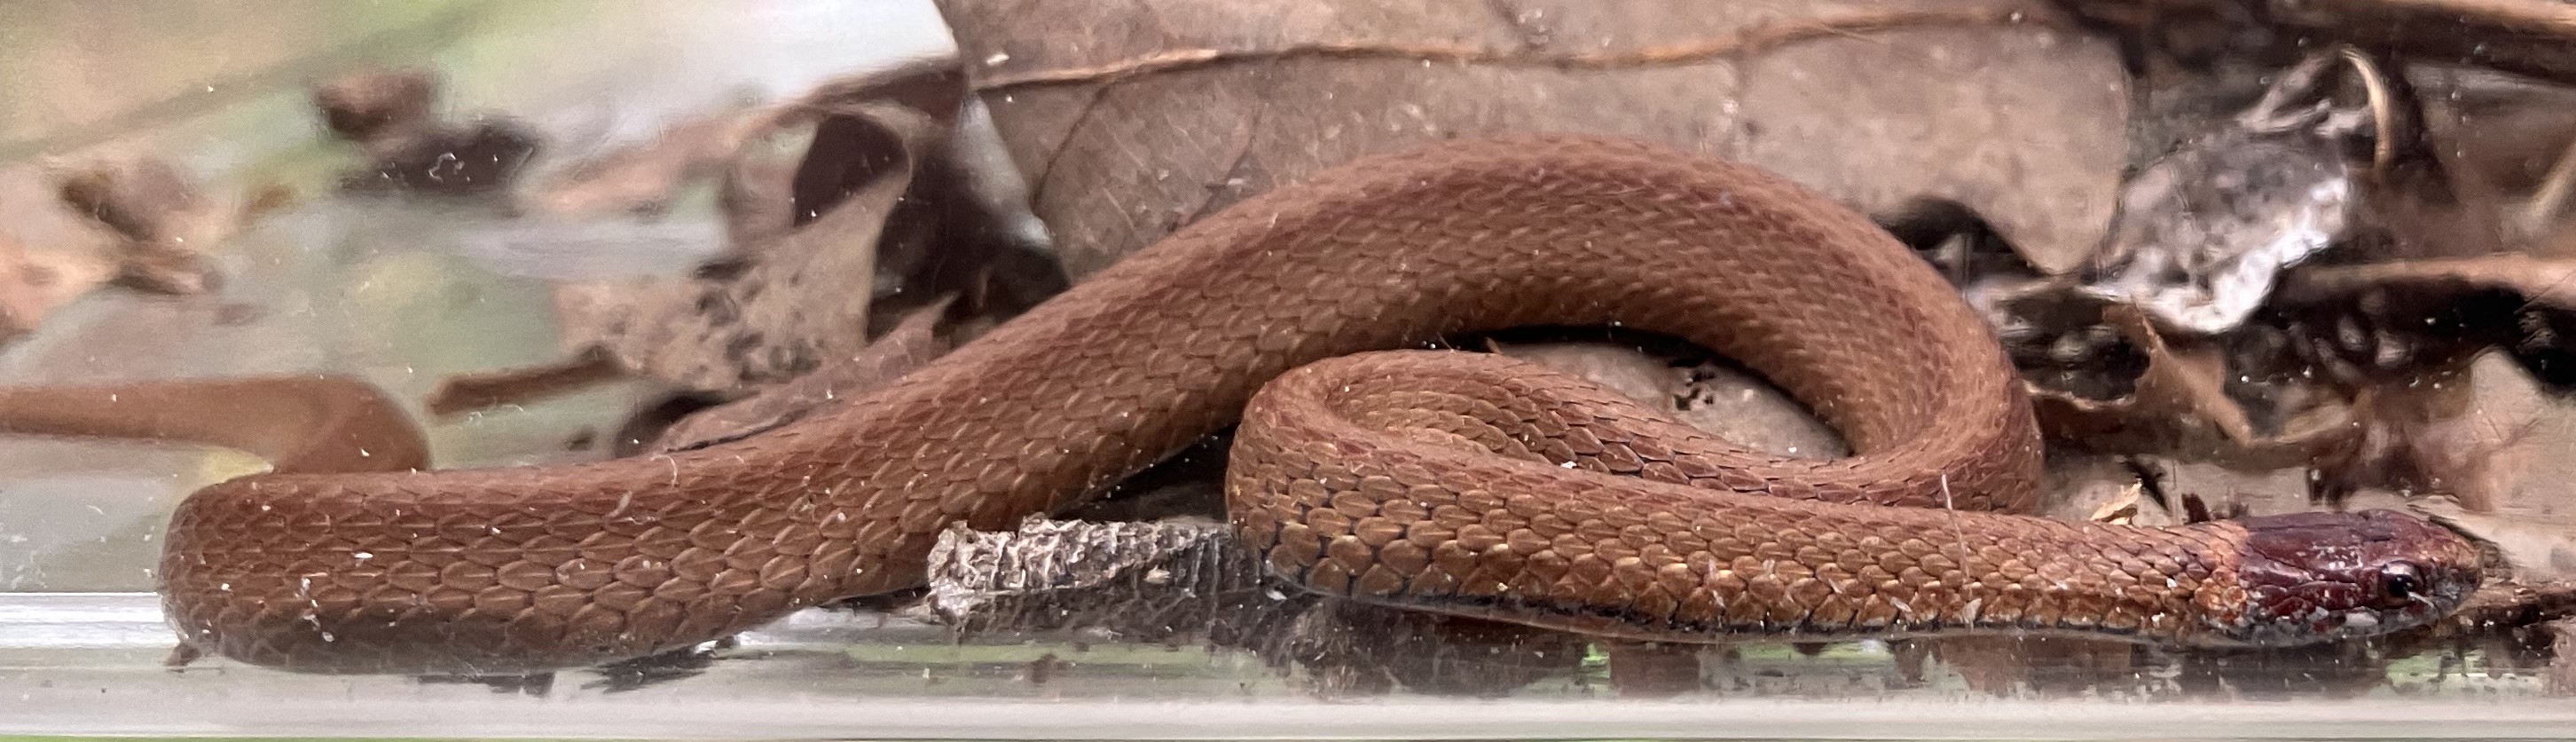 Another photo of a redbelly snake